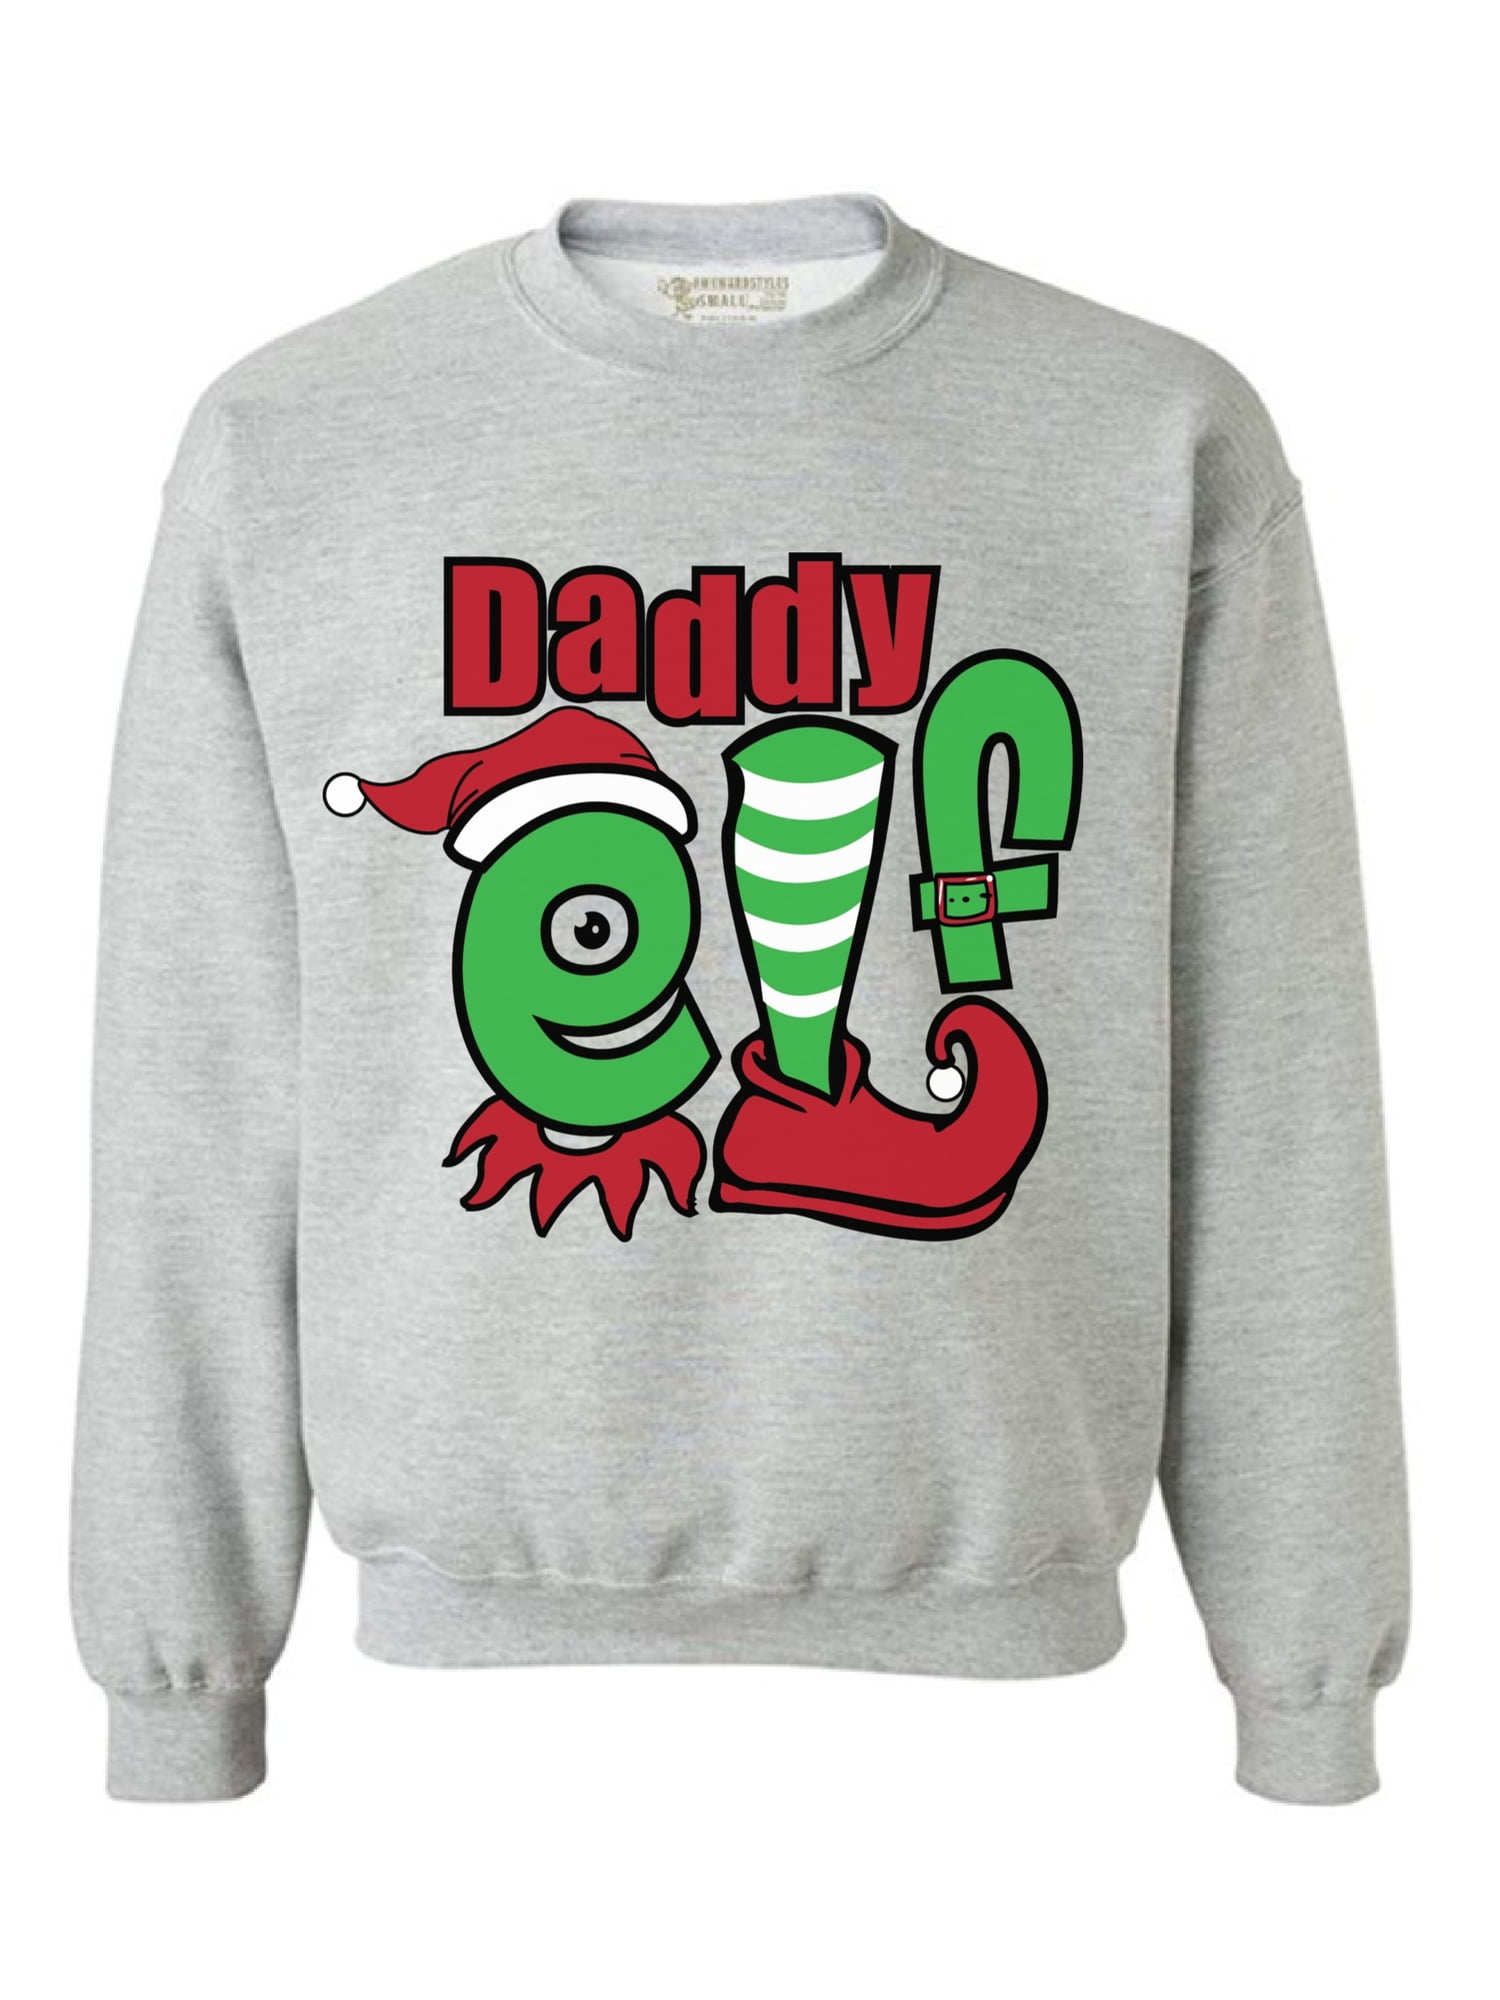 Daddy Elf Christmas Jumper Sweater Jumper Pull Over Present Dad Father Family